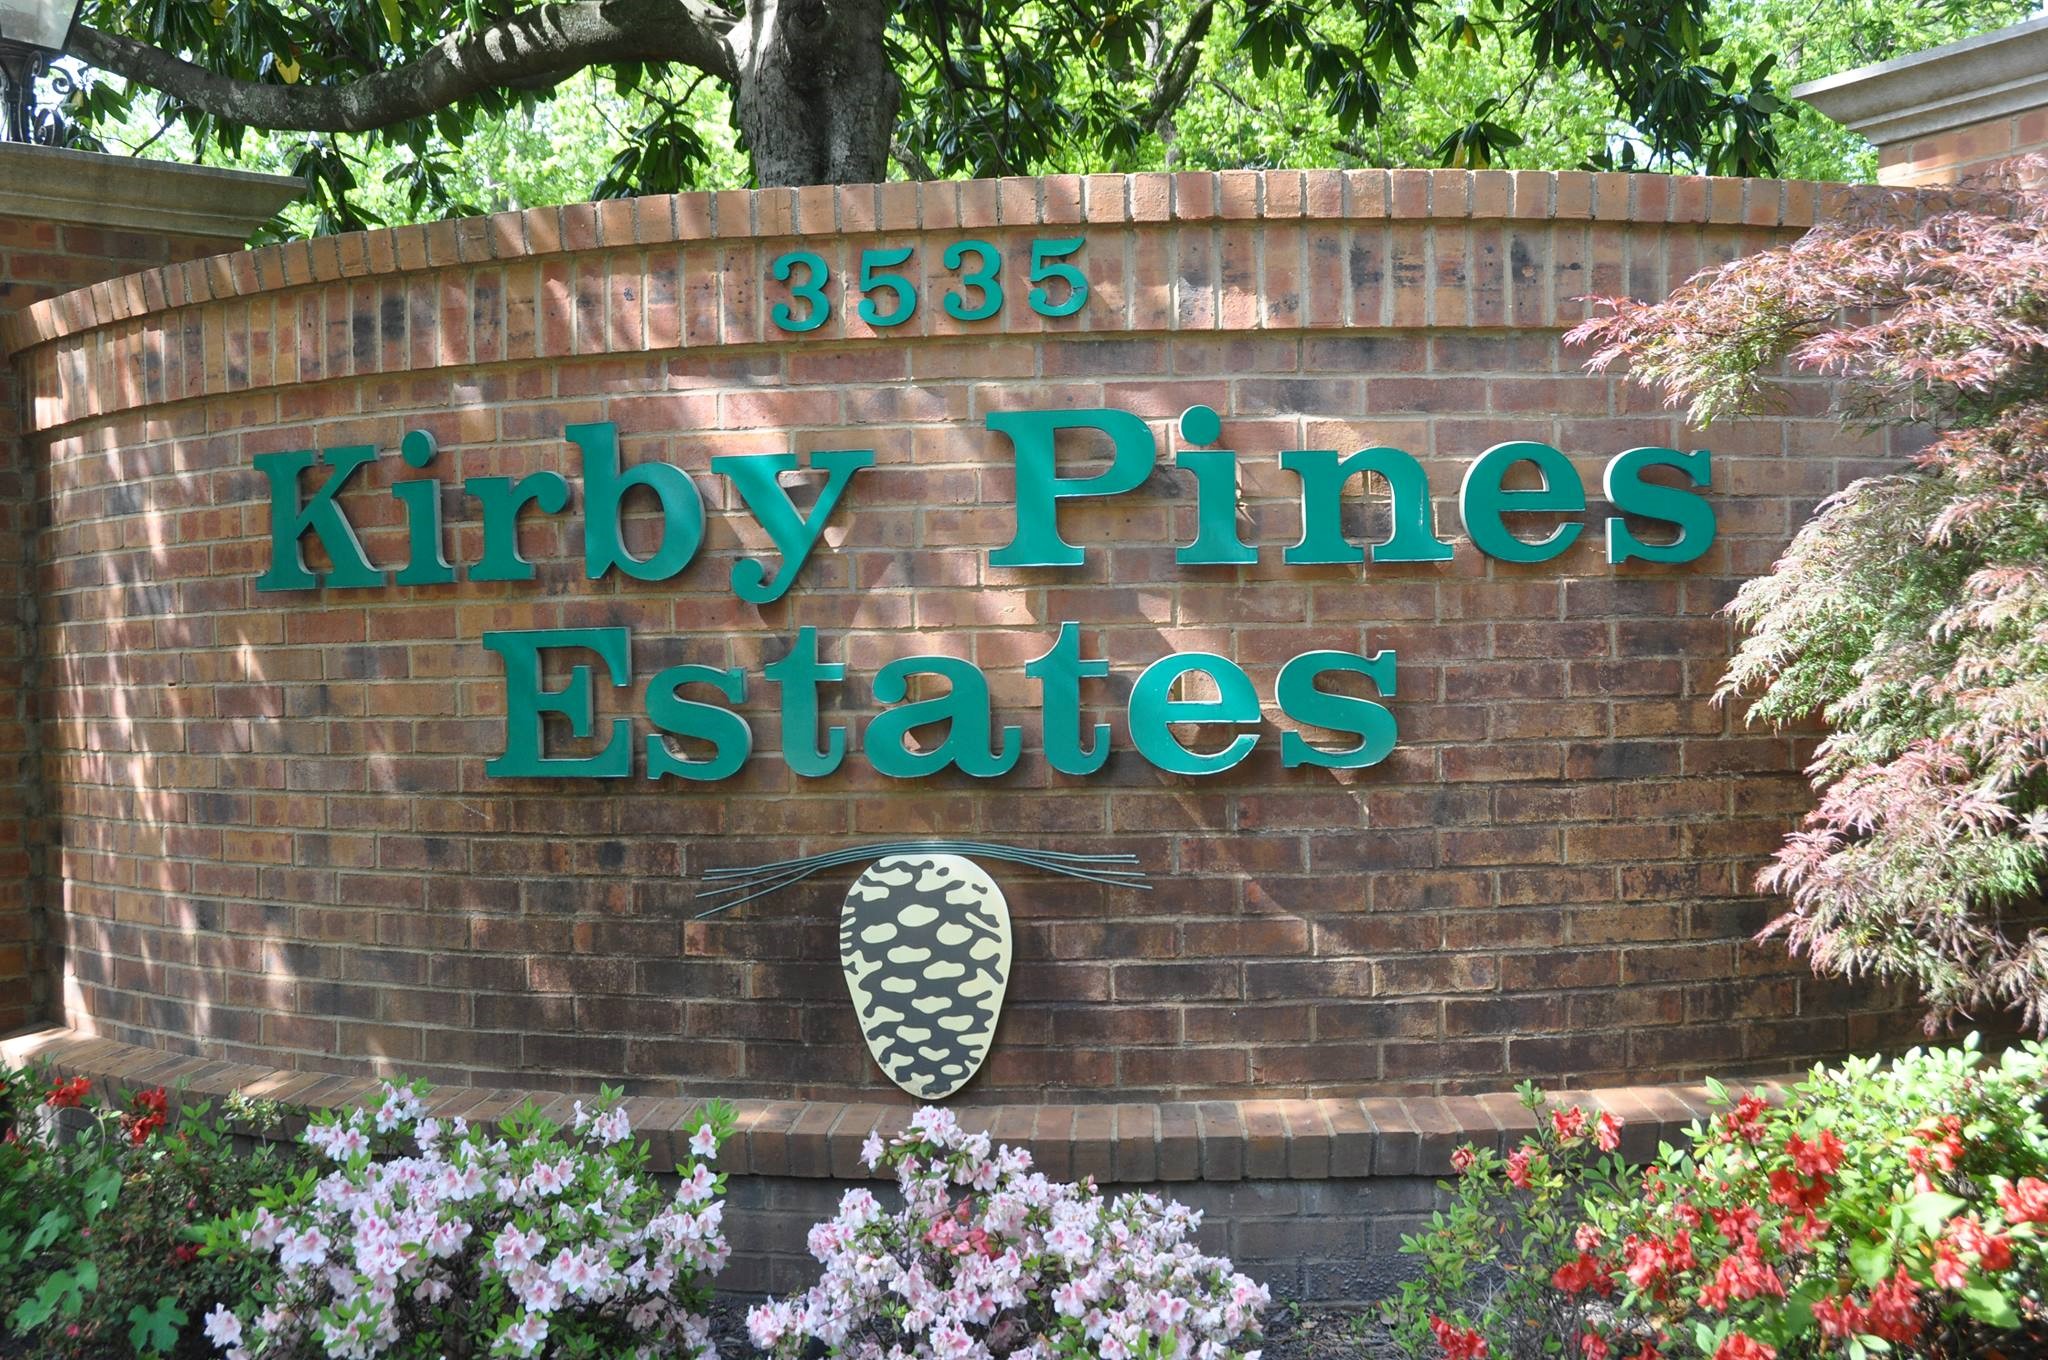 Kirby Pines Manor - 3535 Kirby Parkway - Senior Care Finder